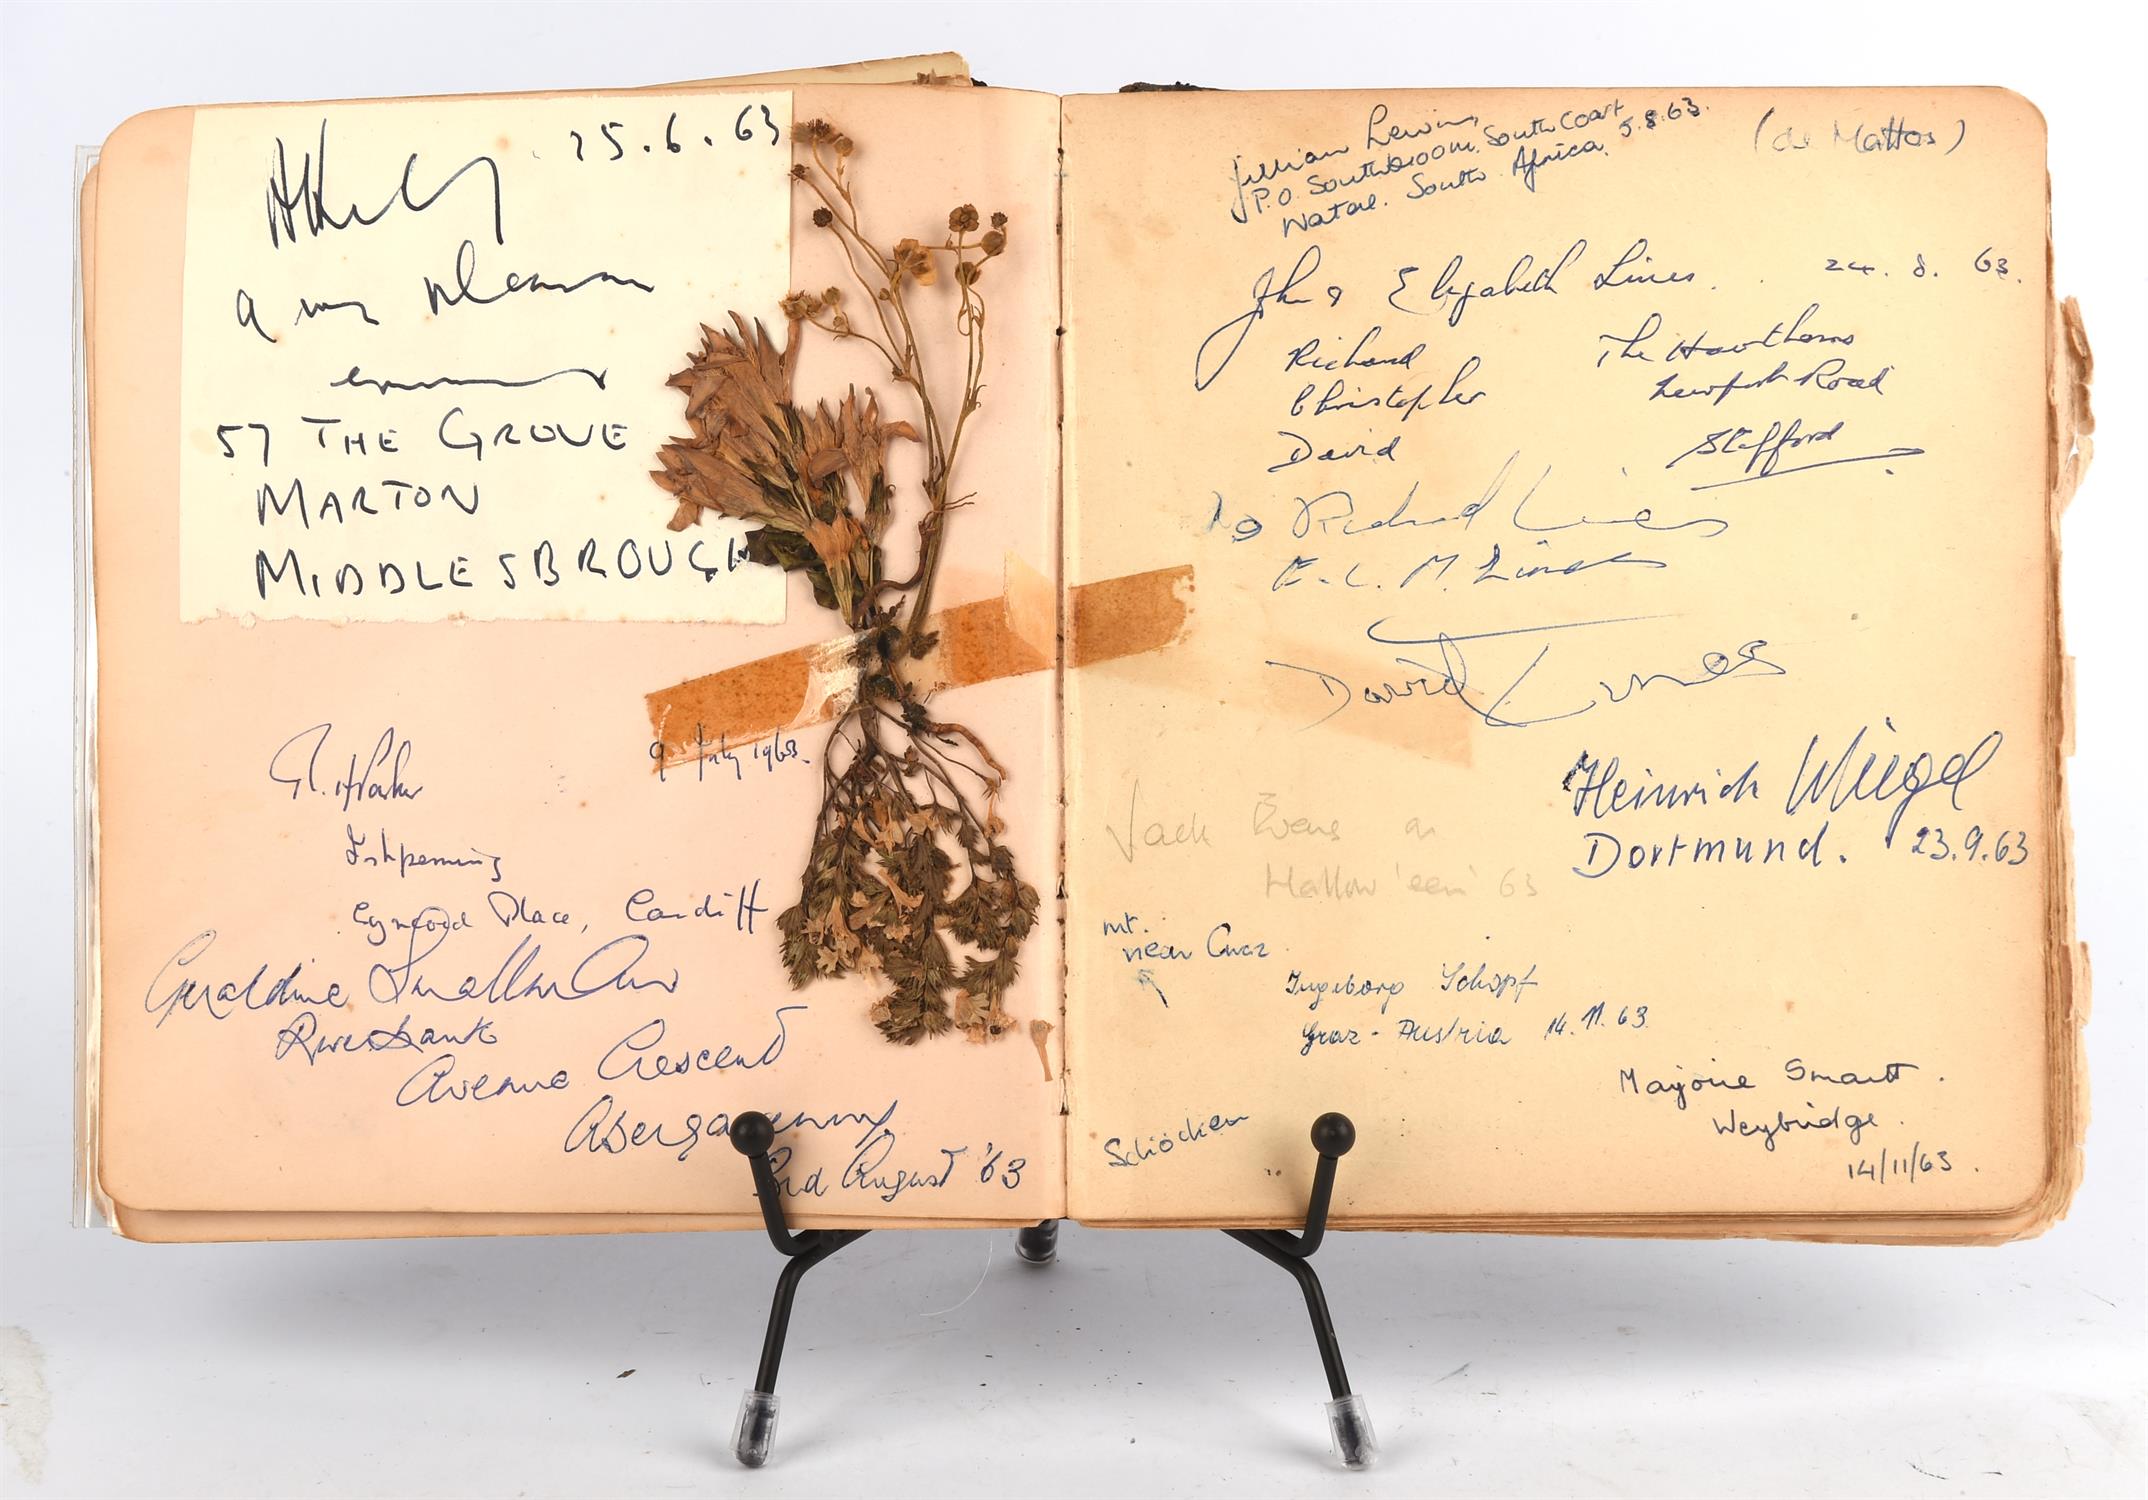 Autograph Album/Visitors Book, 1913-2005 – a bound album with Autographs in gilt to front cover,